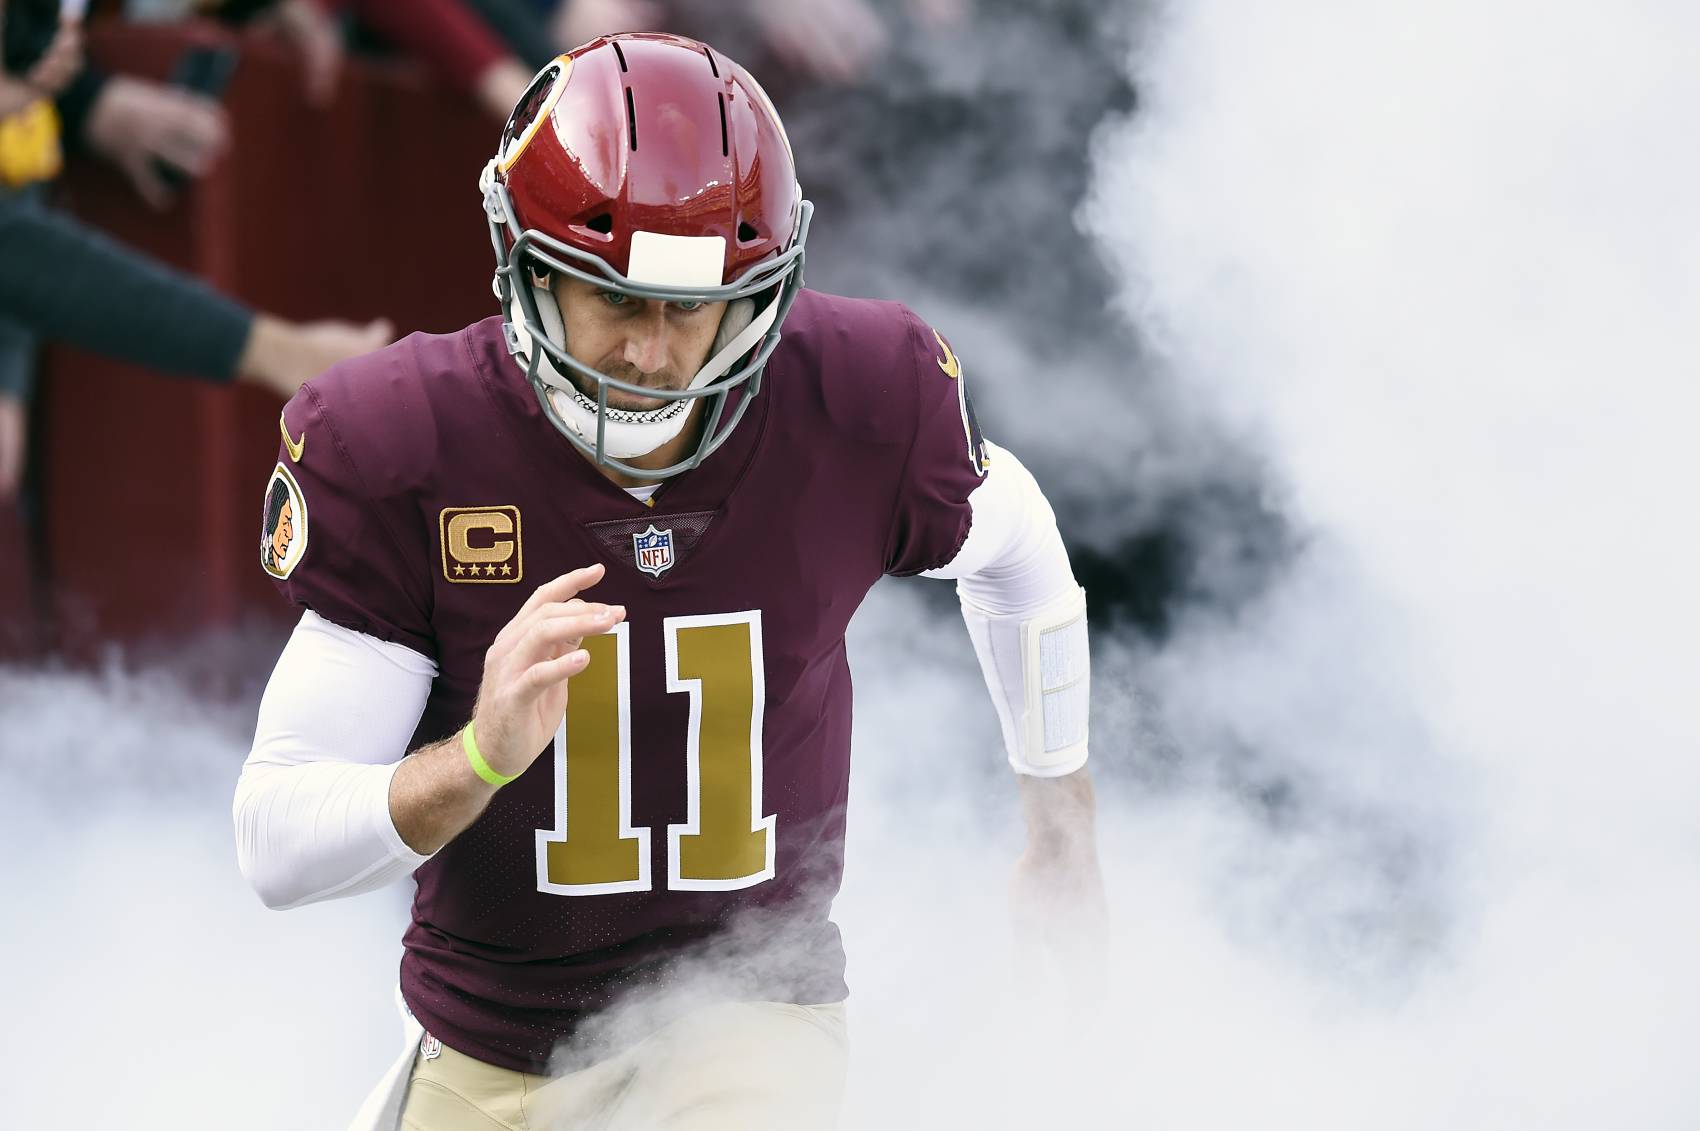 Longtime NFL quarterback Alex Smith last played for the Washington Redskins in 2018.